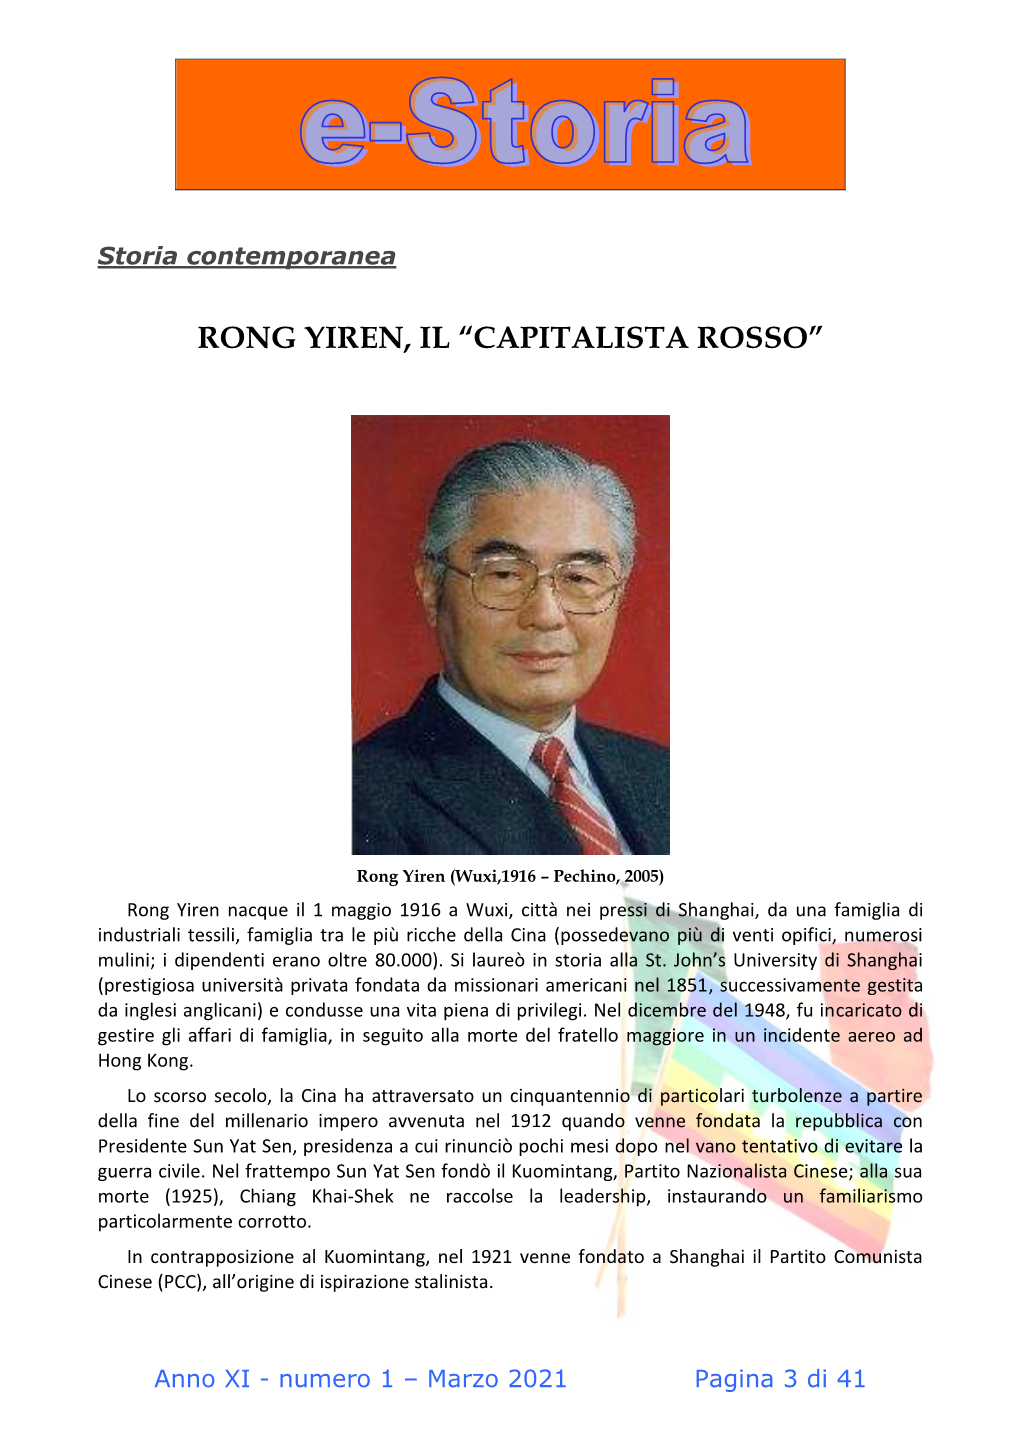 Rong Yiren, Il “Capitalista Rosso”